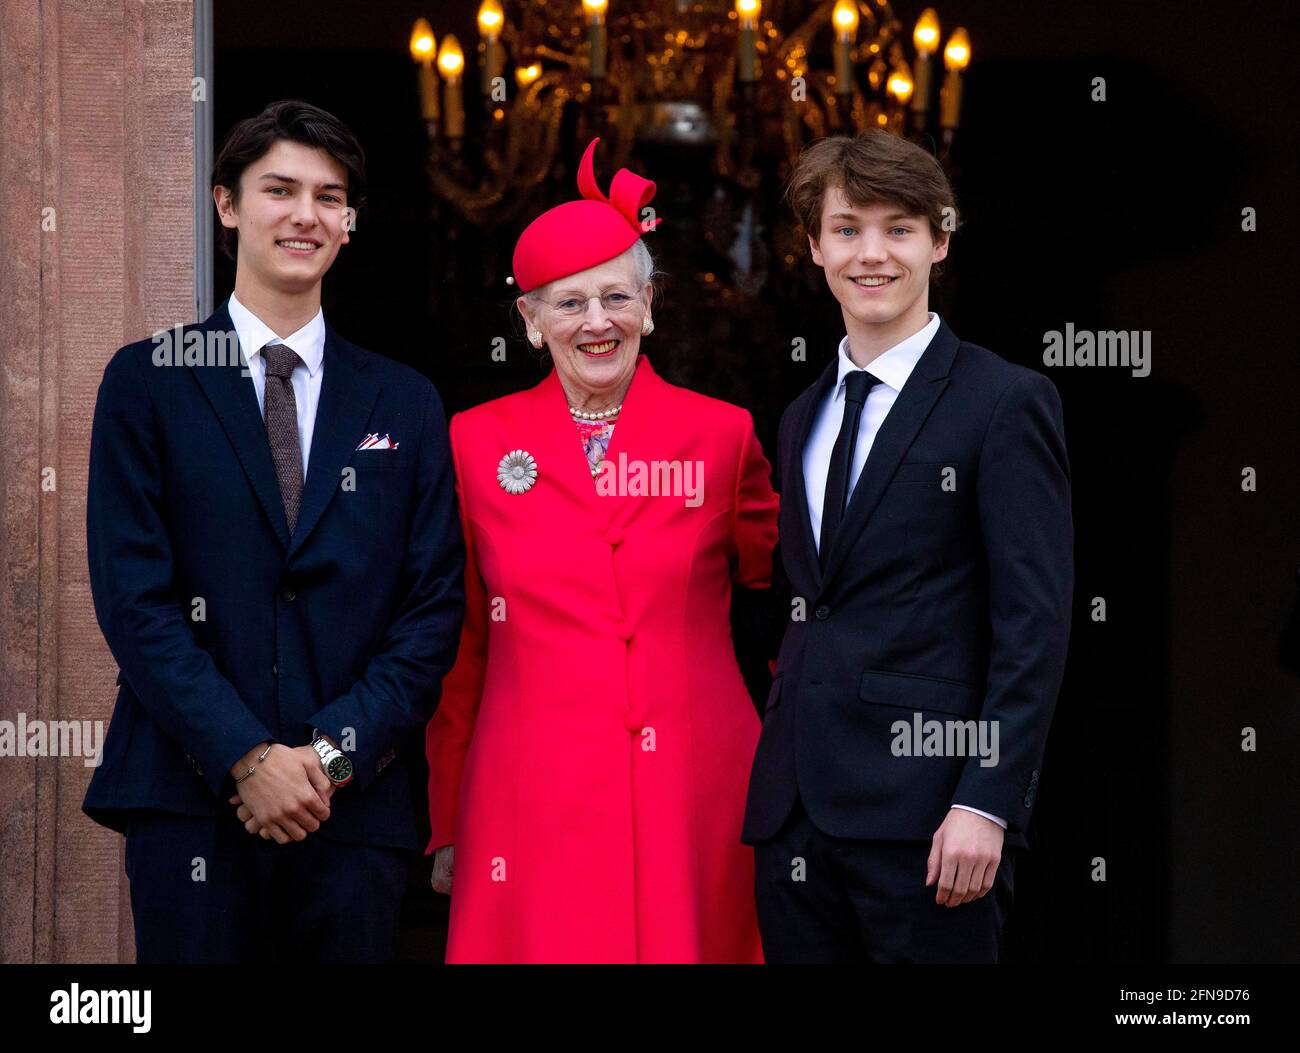 Fredensborg, Denmark. May 15, 2021: Queen Margrethe and Prince Nikolai and  Prince Felix Danish royal family attend the confirmation ( Belijdenis) of  Prince Christian in Fredensborg castle church in Fredensborg, Denmark on